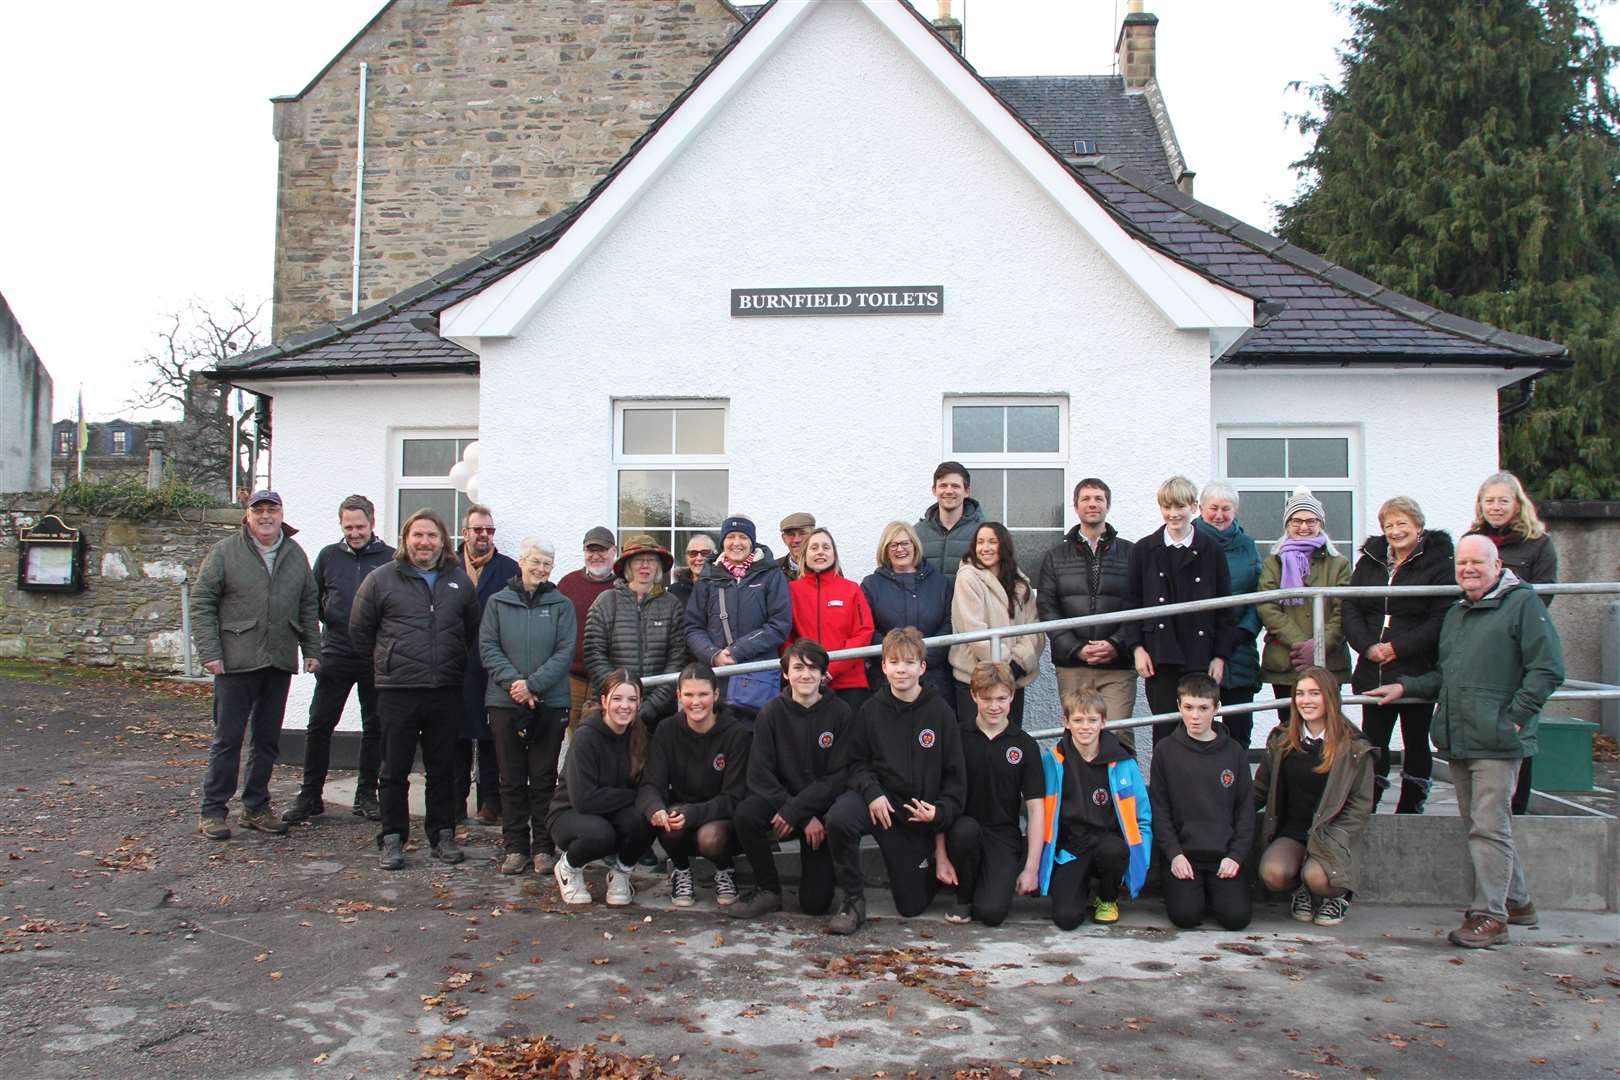 Project supporters gather for the reopening of the improved public conveniences.